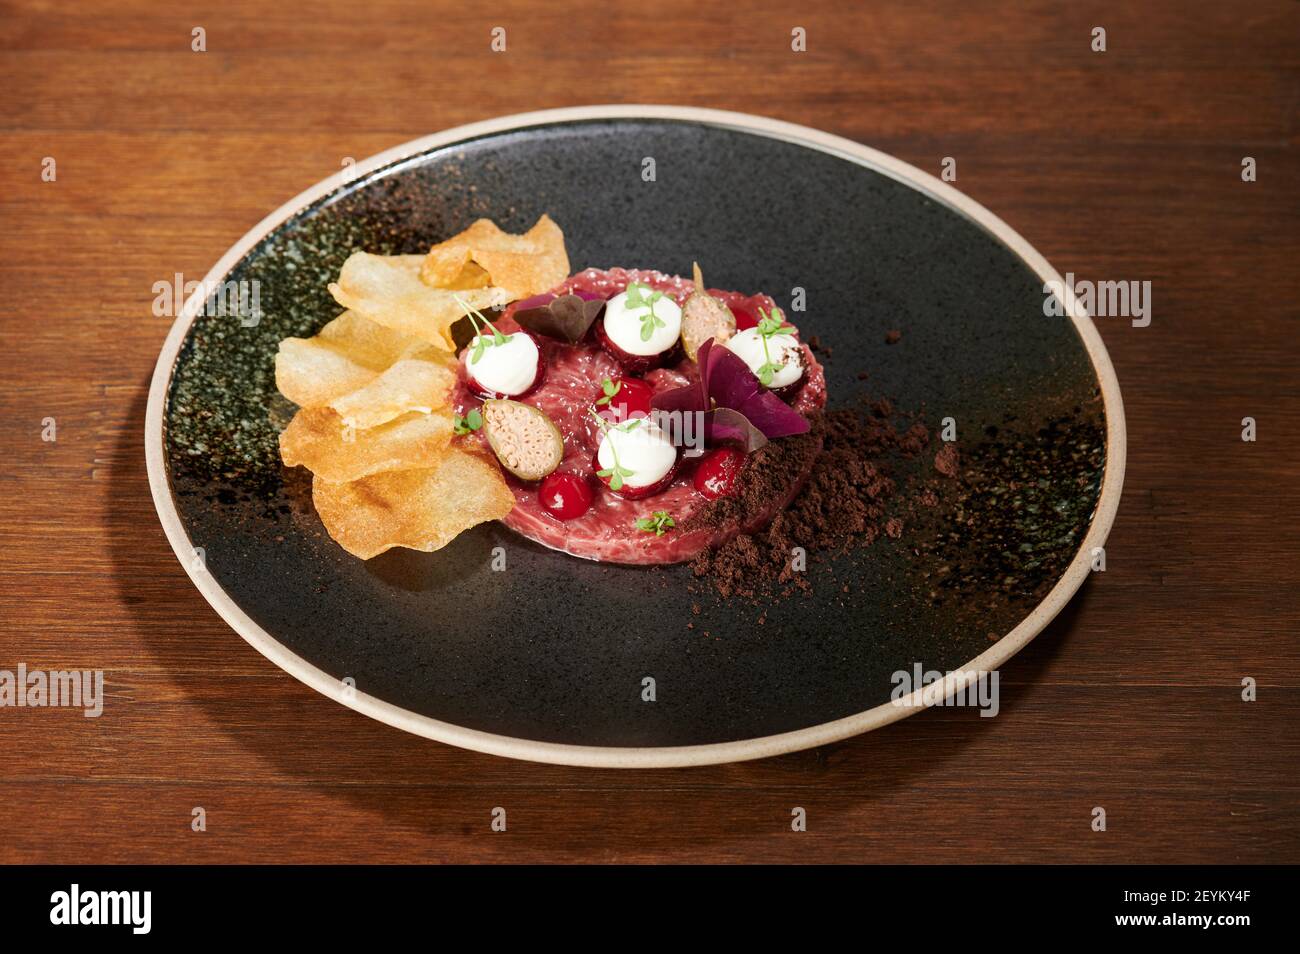 Meat tartare on black grunge plate perspective view Stock Photo